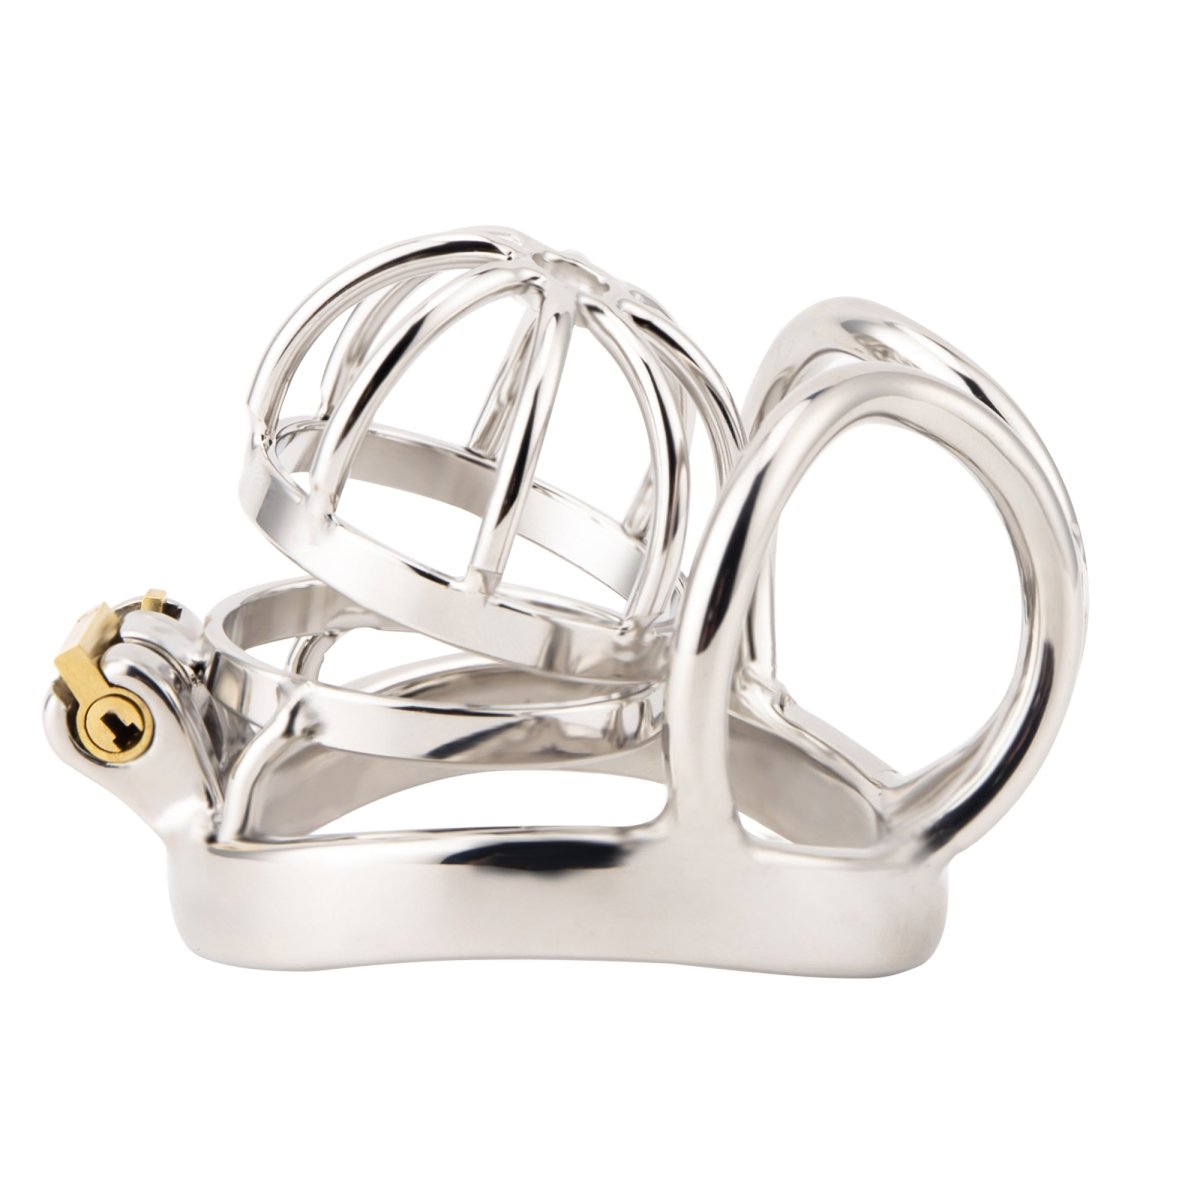 stainless steel chastity device ball bondage